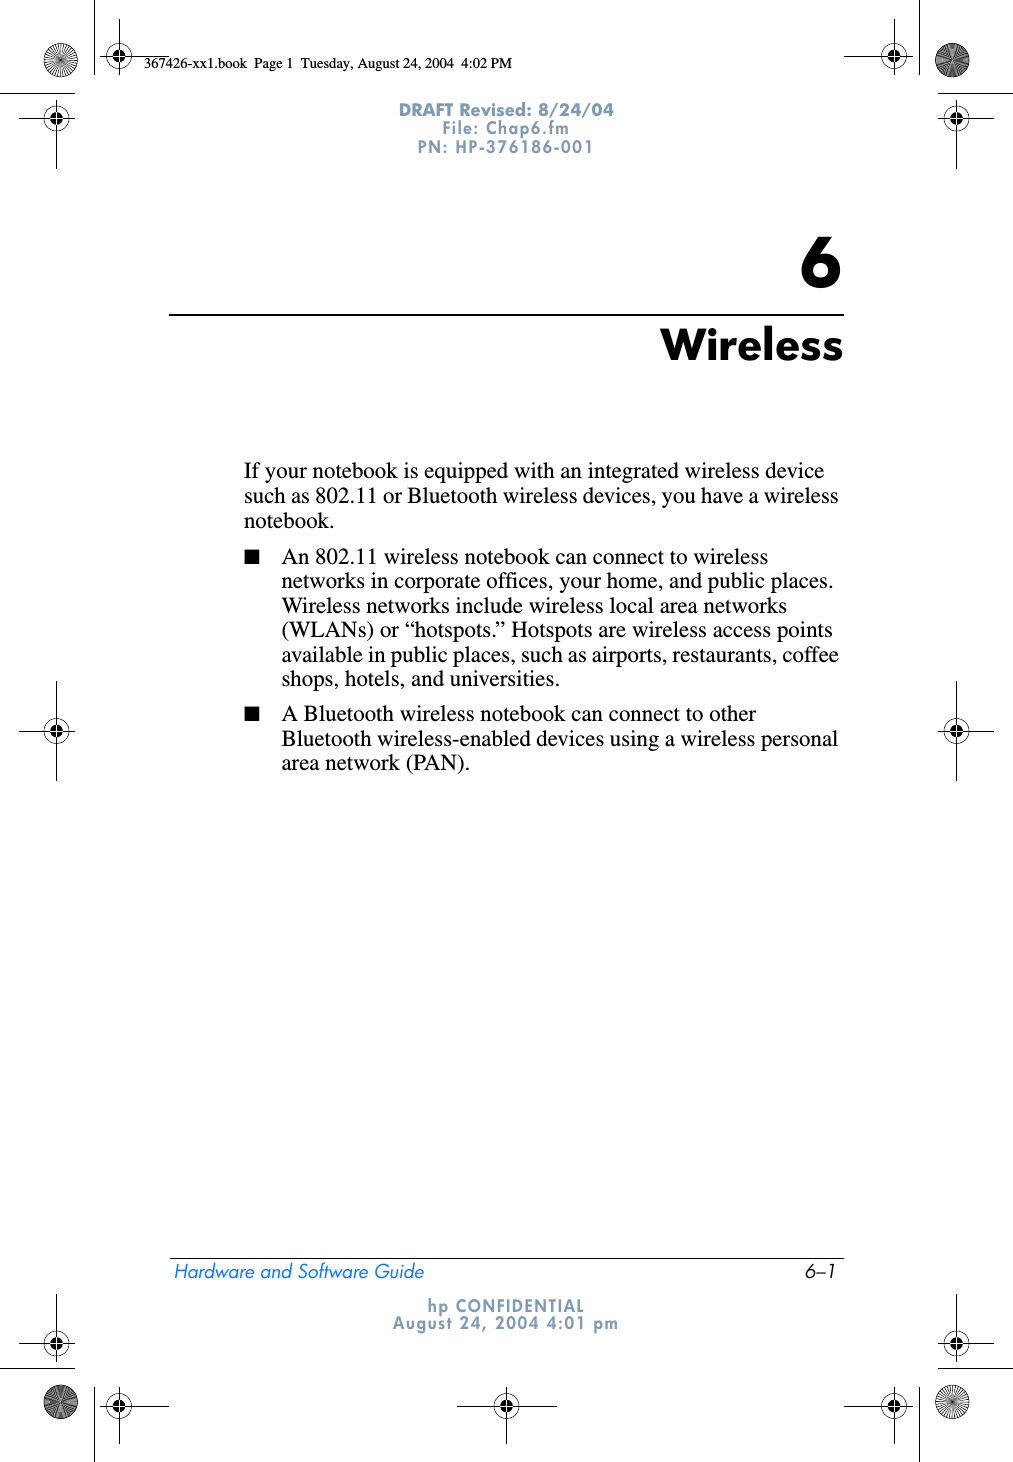 Hardware and Software Guide 6–1DRAFT Revised: 8/24/04File: Chap6.fm PN: HP-376186-001 hp CONFIDENTIALAugust 24, 2004 4:01 pm6WirelessIf your notebook is equipped with an integrated wireless device such as 802.11 or Bluetooth wireless devices, you have a wireless notebook. ■An 802.11 wireless notebook can connect to wireless networks in corporate offices, your home, and public places. Wireless networks include wireless local area networks (WLANs) or “hotspots.” Hotspots are wireless access points available in public places, such as airports, restaurants, coffee shops, hotels, and universities.■A Bluetooth wireless notebook can connect to other Bluetooth wireless-enabled devices using a wireless personal area network (PAN).367426-xx1.book  Page 1  Tuesday, August 24, 2004  4:02 PM